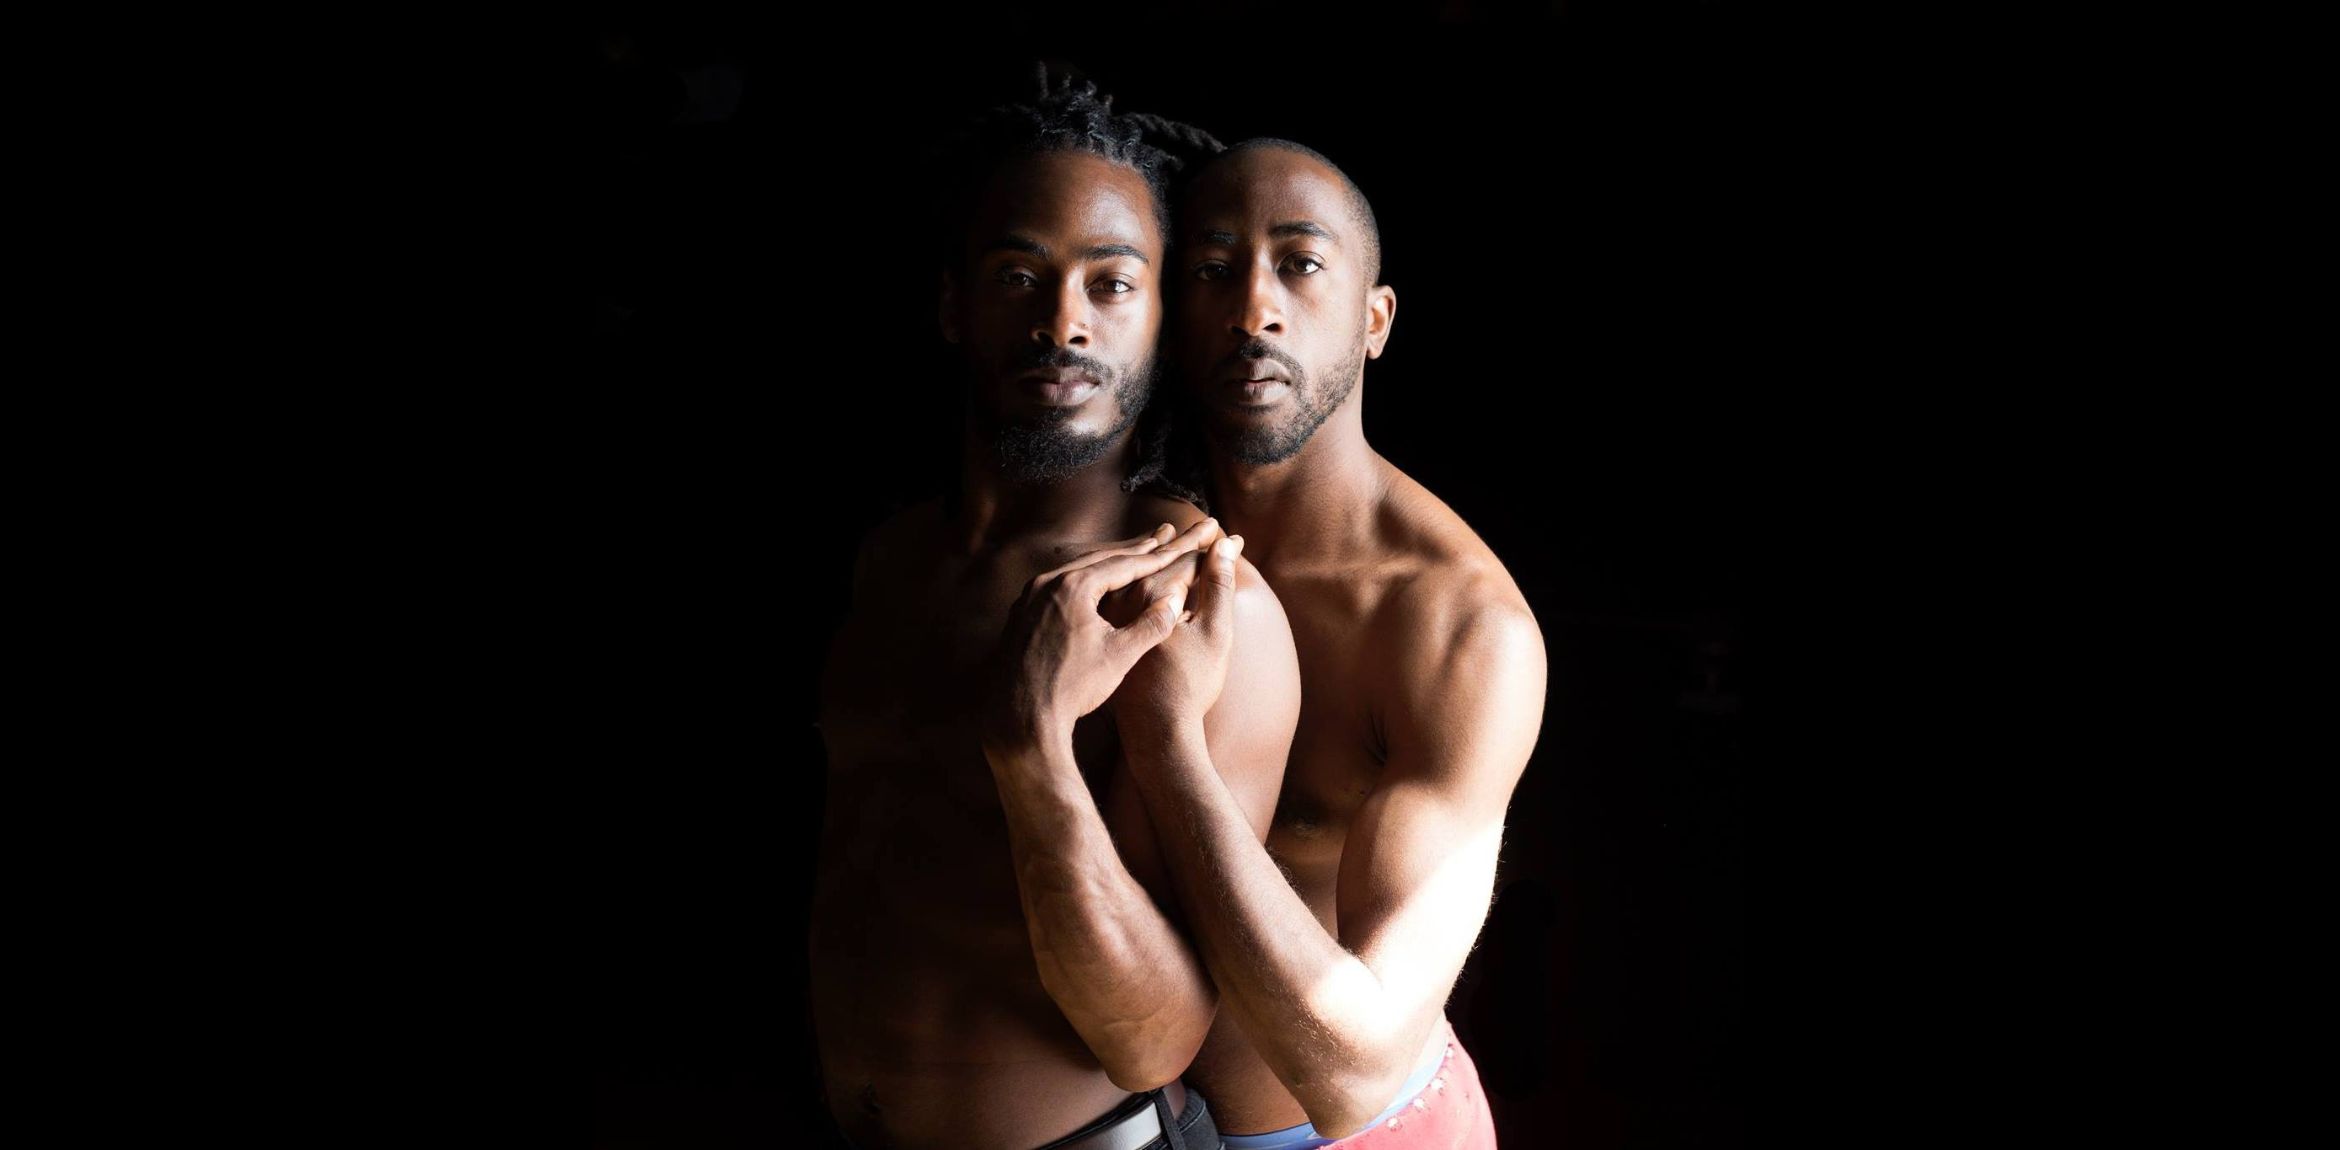 Two dancers posing together in a dark black background